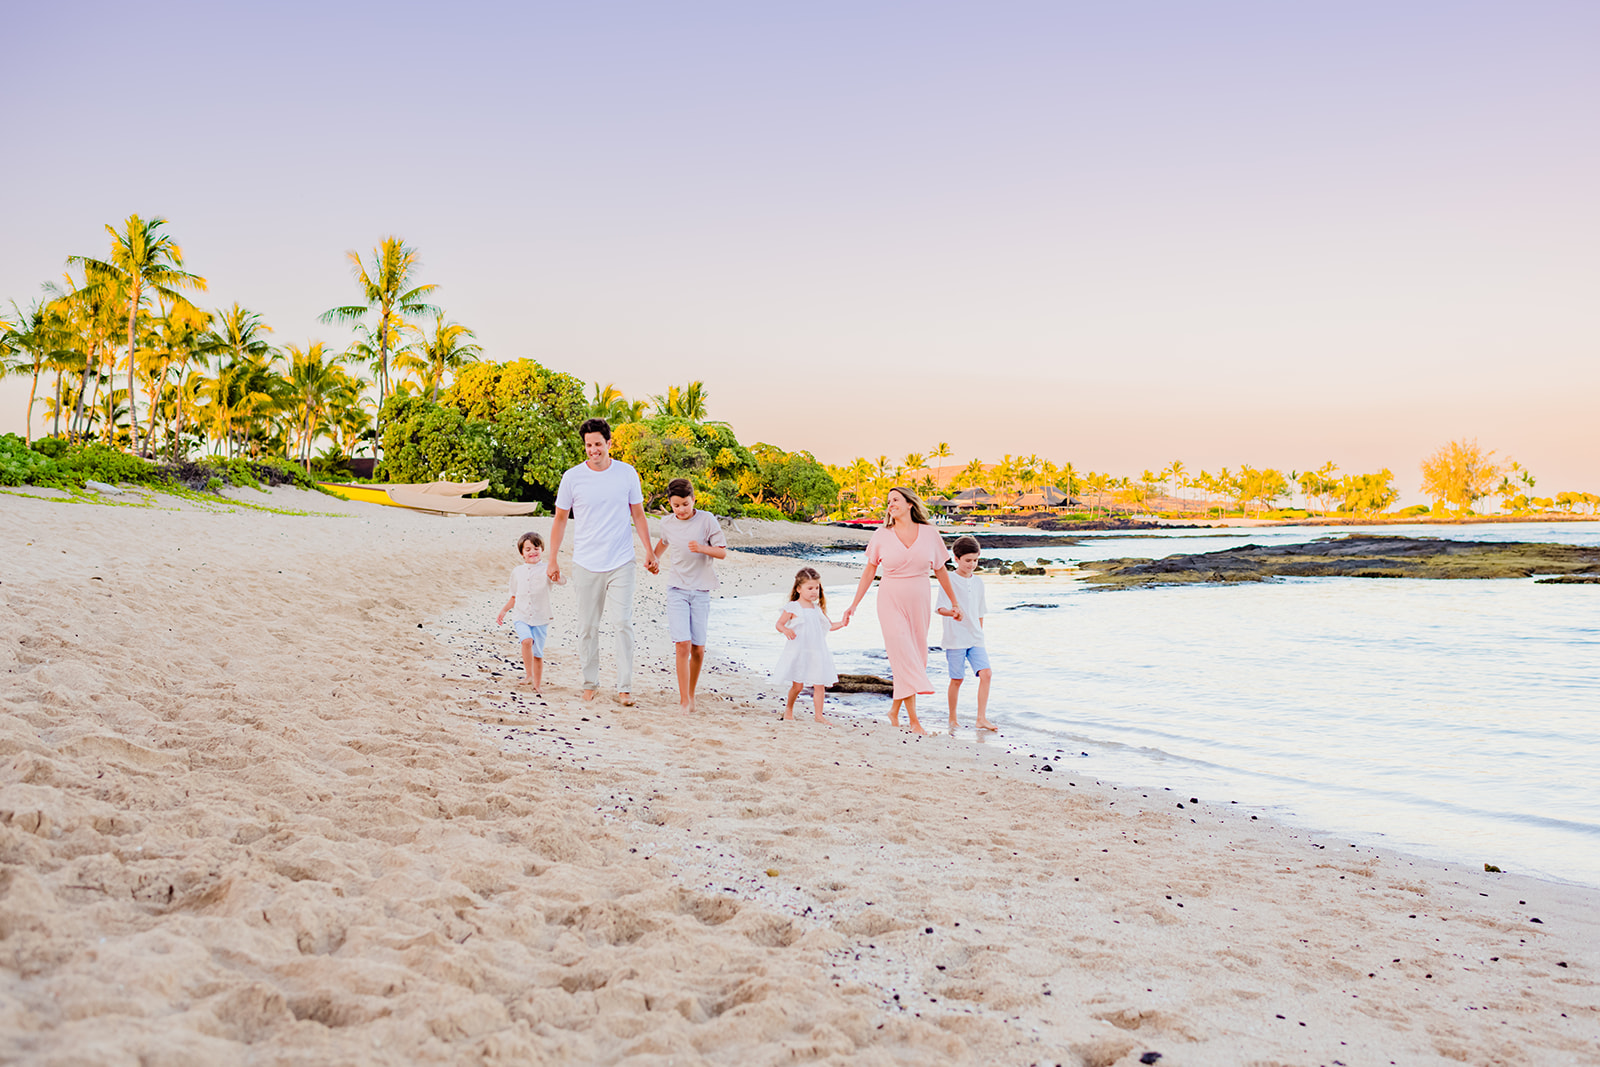 A family with two parents and four children walk hand-in-hand on the beach while taking professional family pictures in Hawaii.